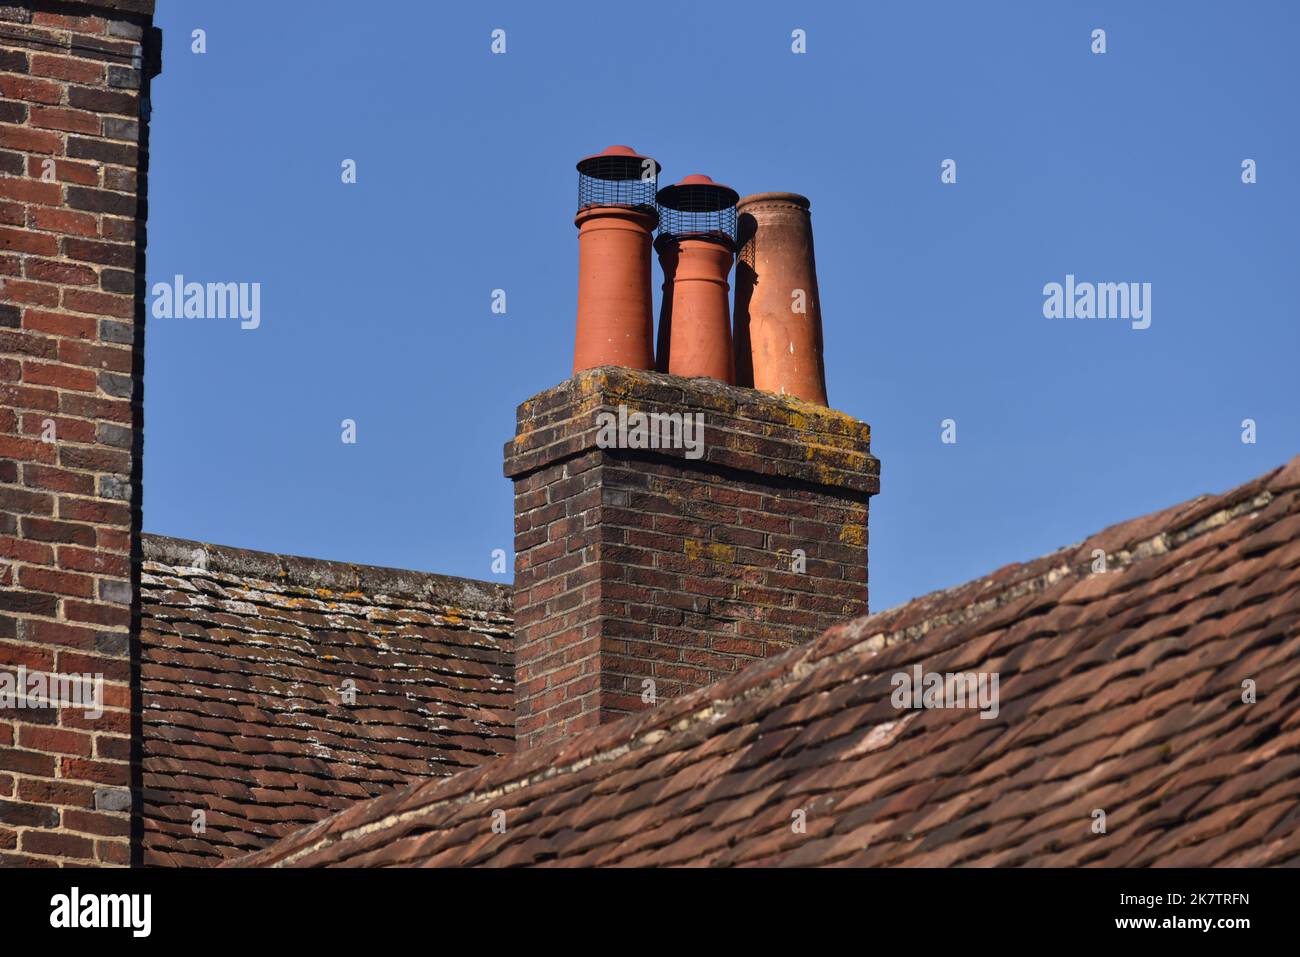 Old style brick chimney with ceramic pot on the top in a rural village in Hampshire, England. Stock Photo